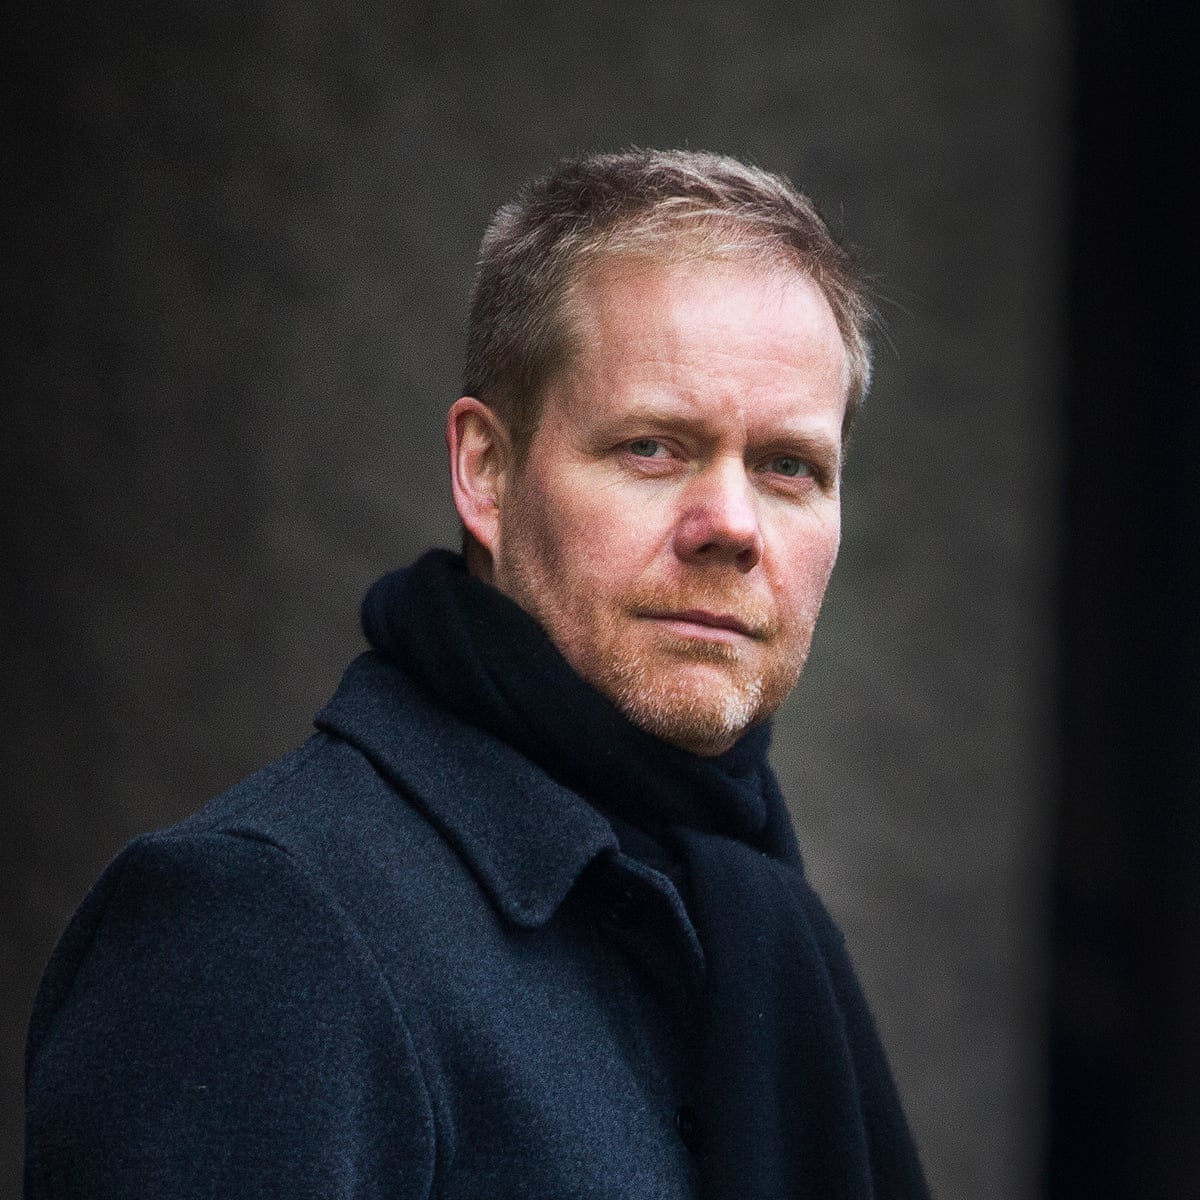 Like seeing a sculpture from a different angle': Max Richter on